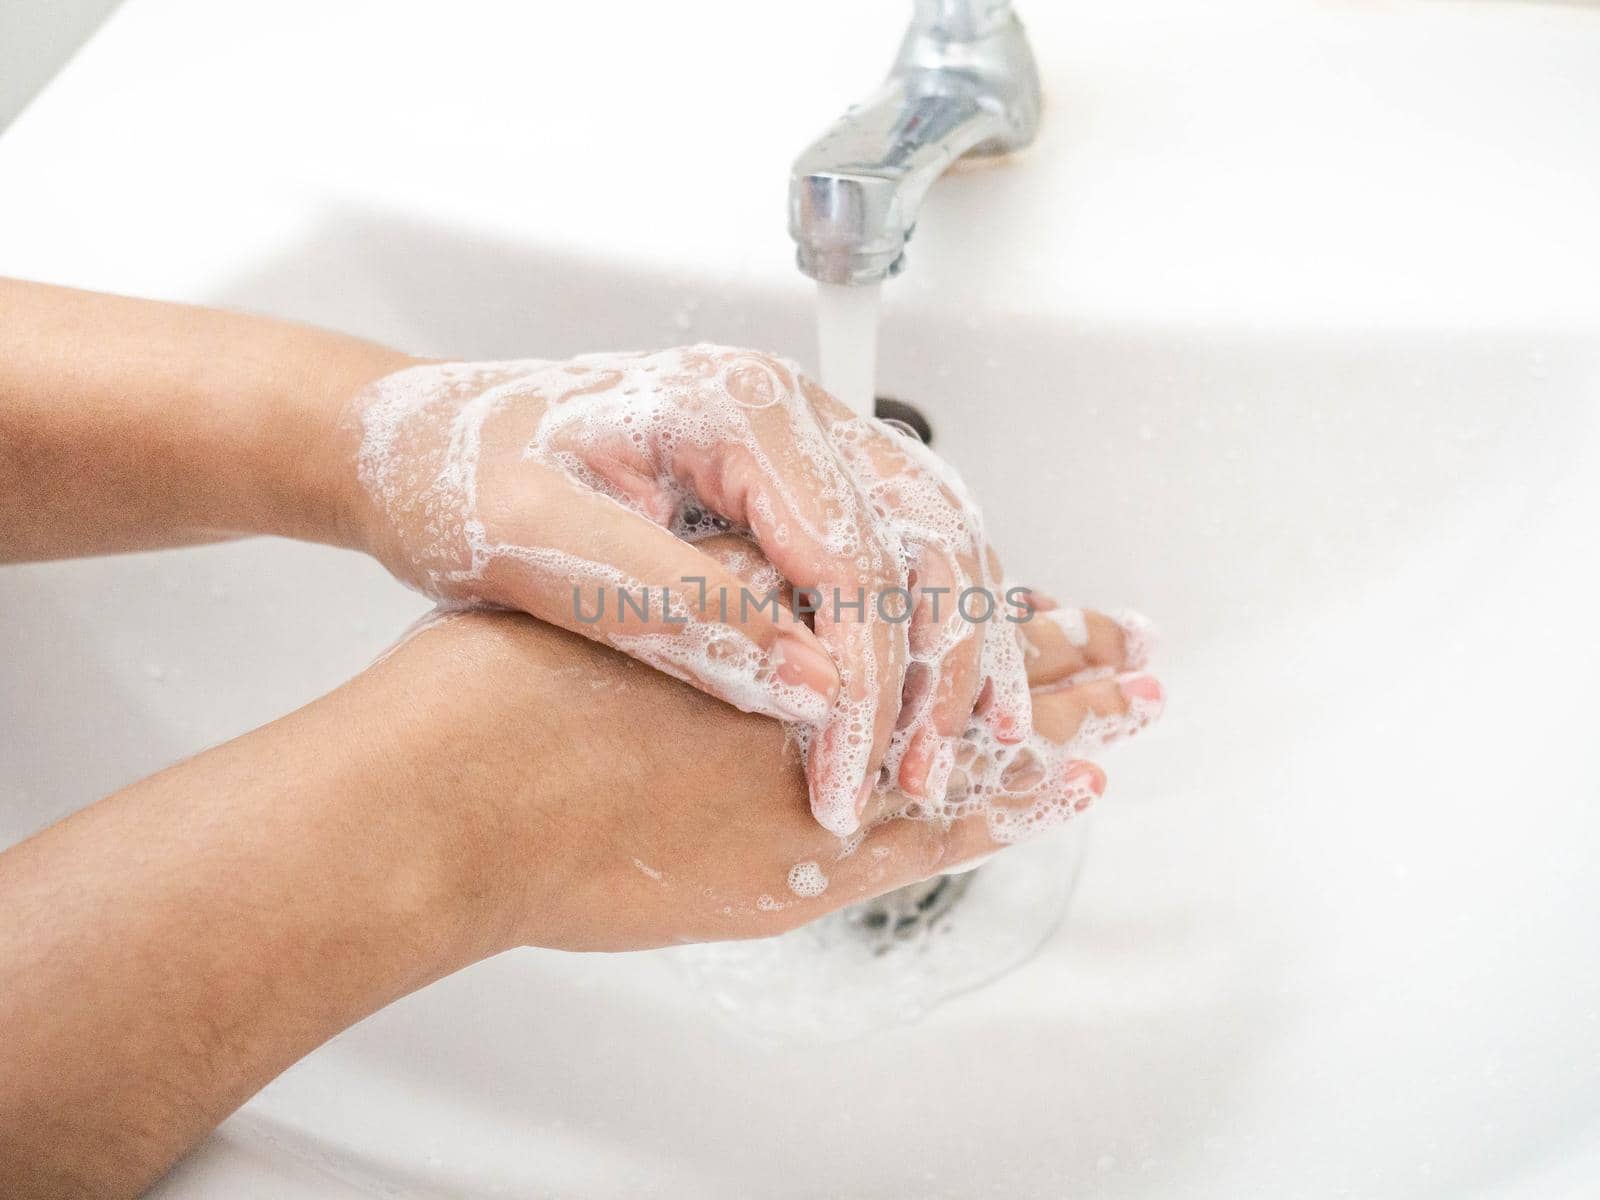 A woman cleaning hands Use hand soap until white bubbles form in the basin.